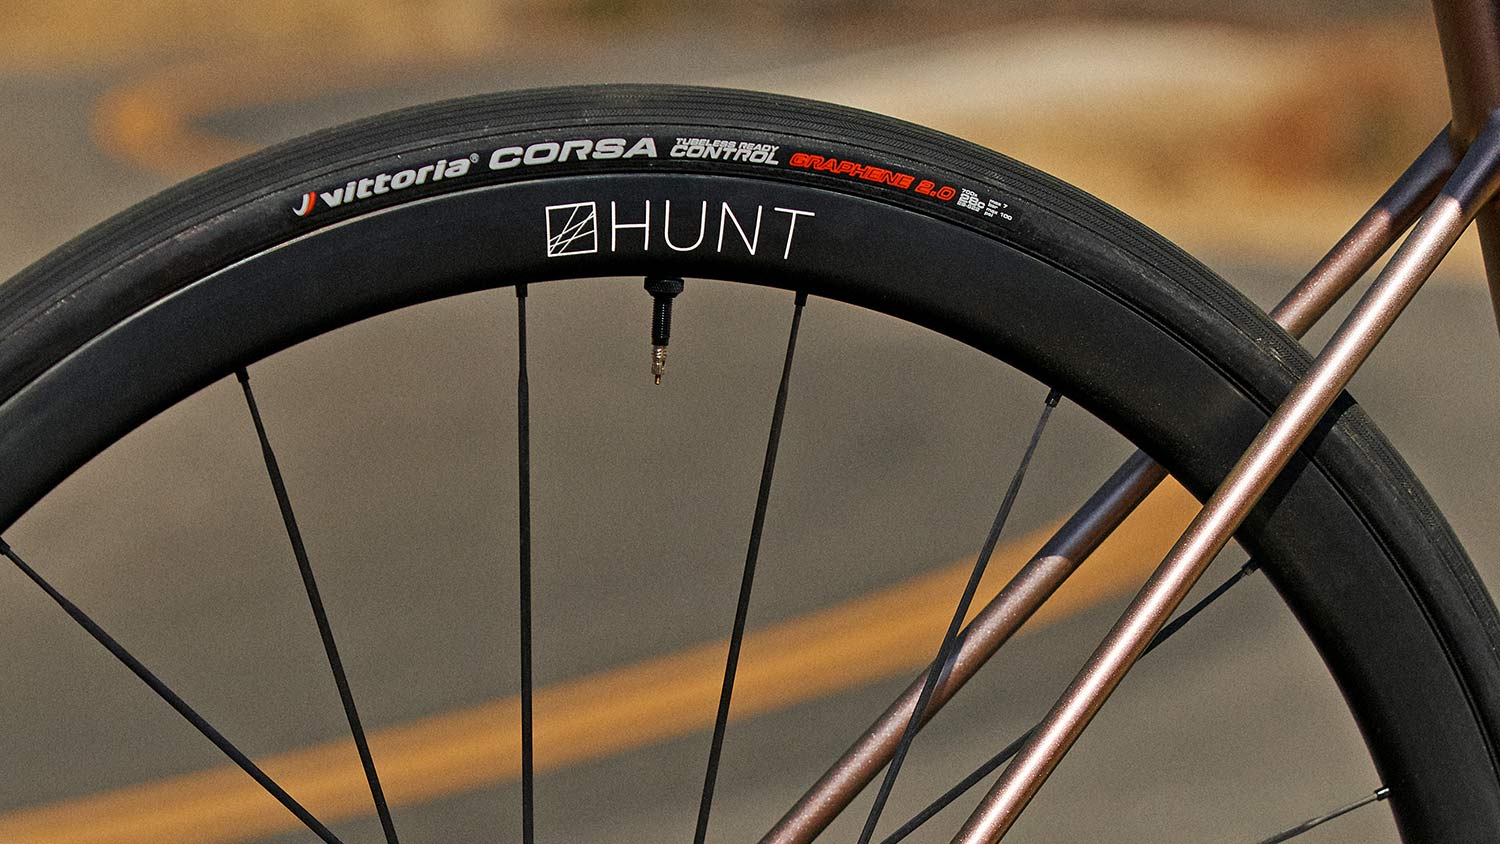 Hunt 32 Aerodynamicist UD Carbon Spoke Disc road bike wheels, photo by Dominique Powers, tubeless tires